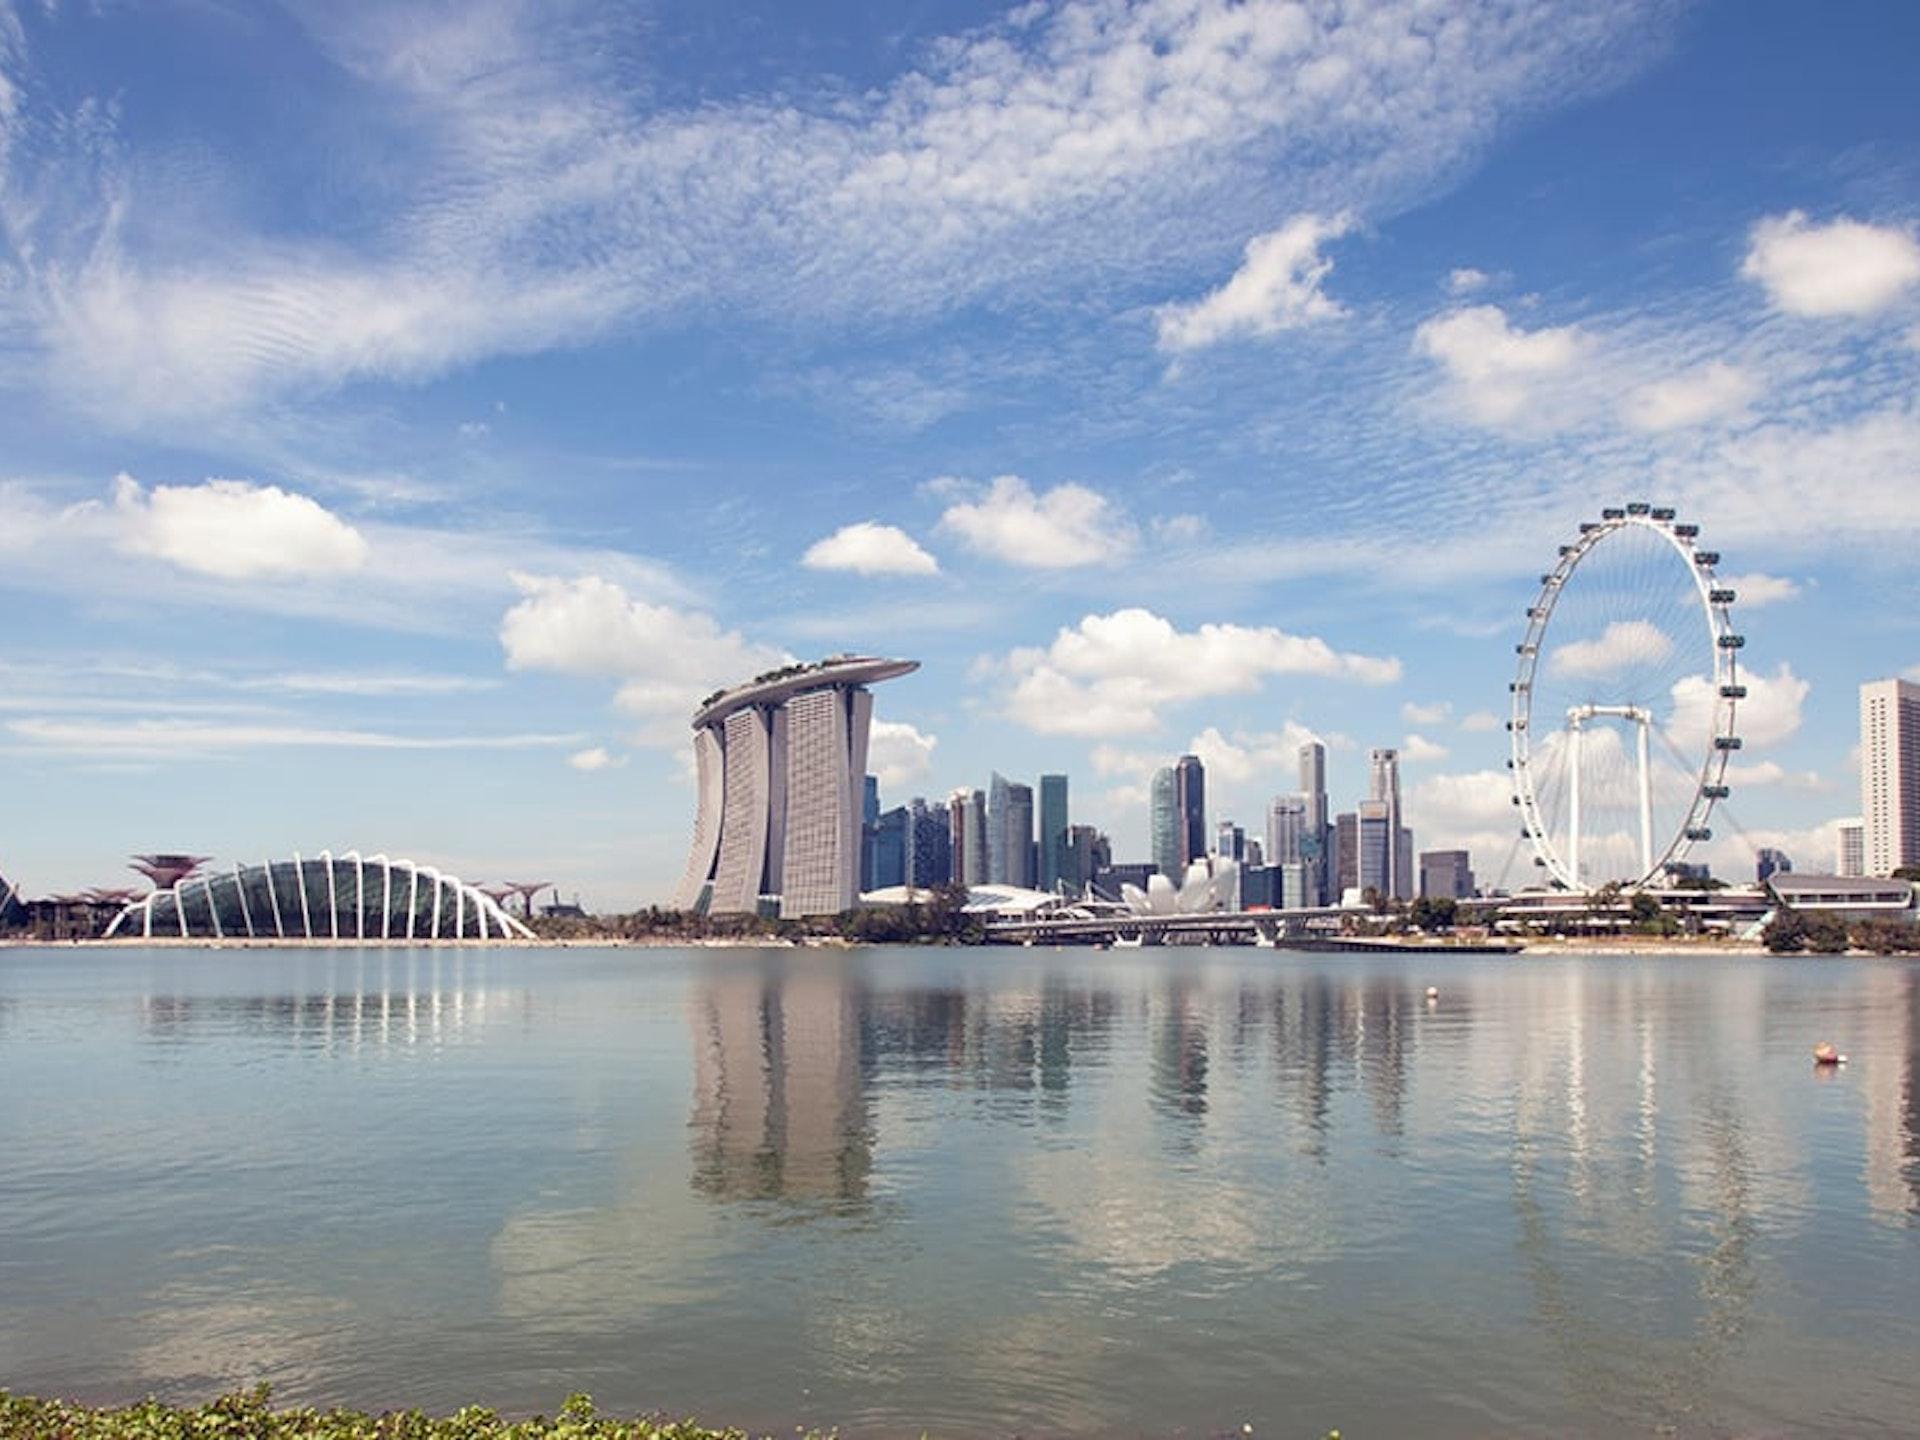 Get the latest news and updates on e-invoicing, e-ordering, e-archiving and indirect tax regulatory requirements for Singapore.